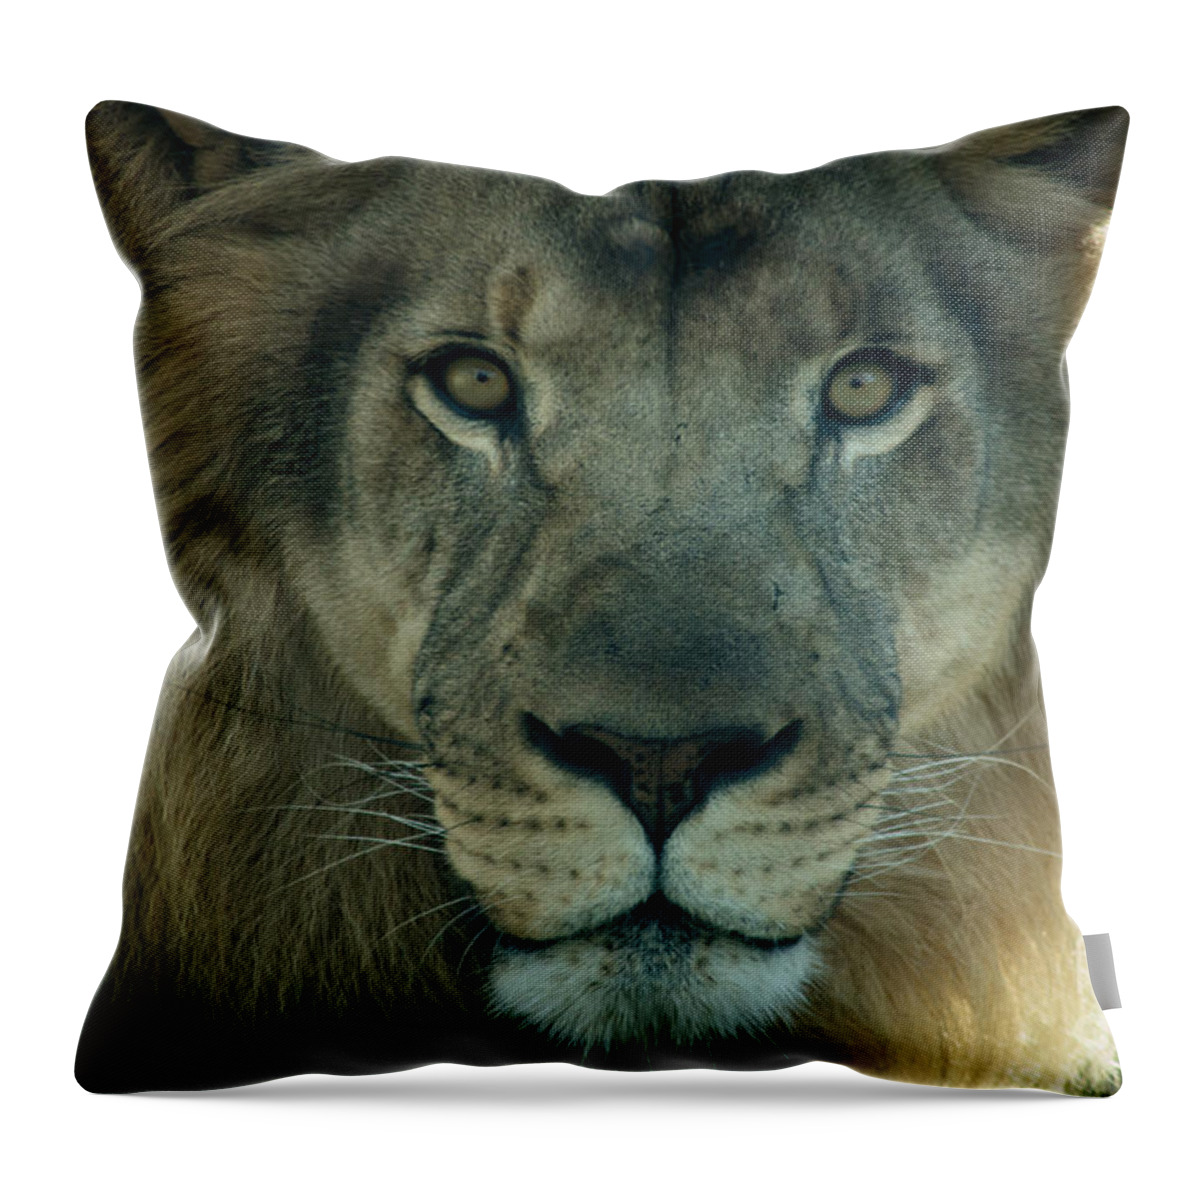 Lion Throw Pillow featuring the photograph African Lion by David Rucker